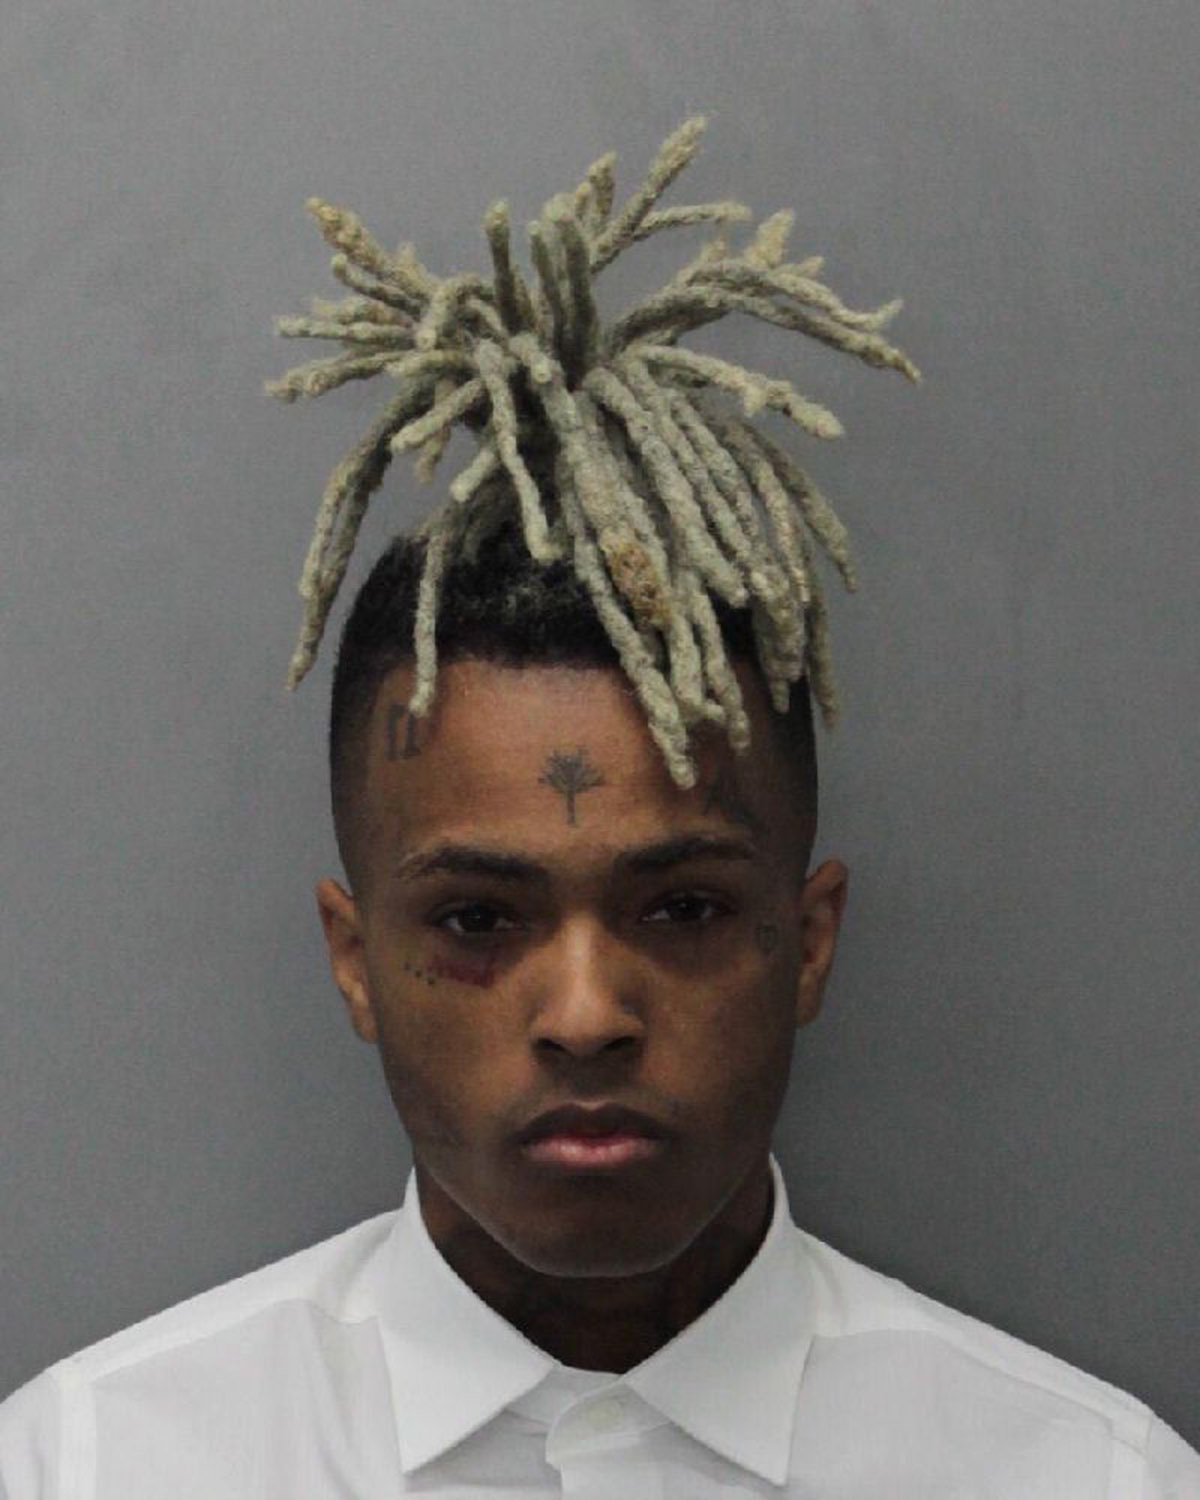 XXXTentacion's mug shot after being charged with seven felonies stemming from a 2016 domestic violence case. | Source: Getty